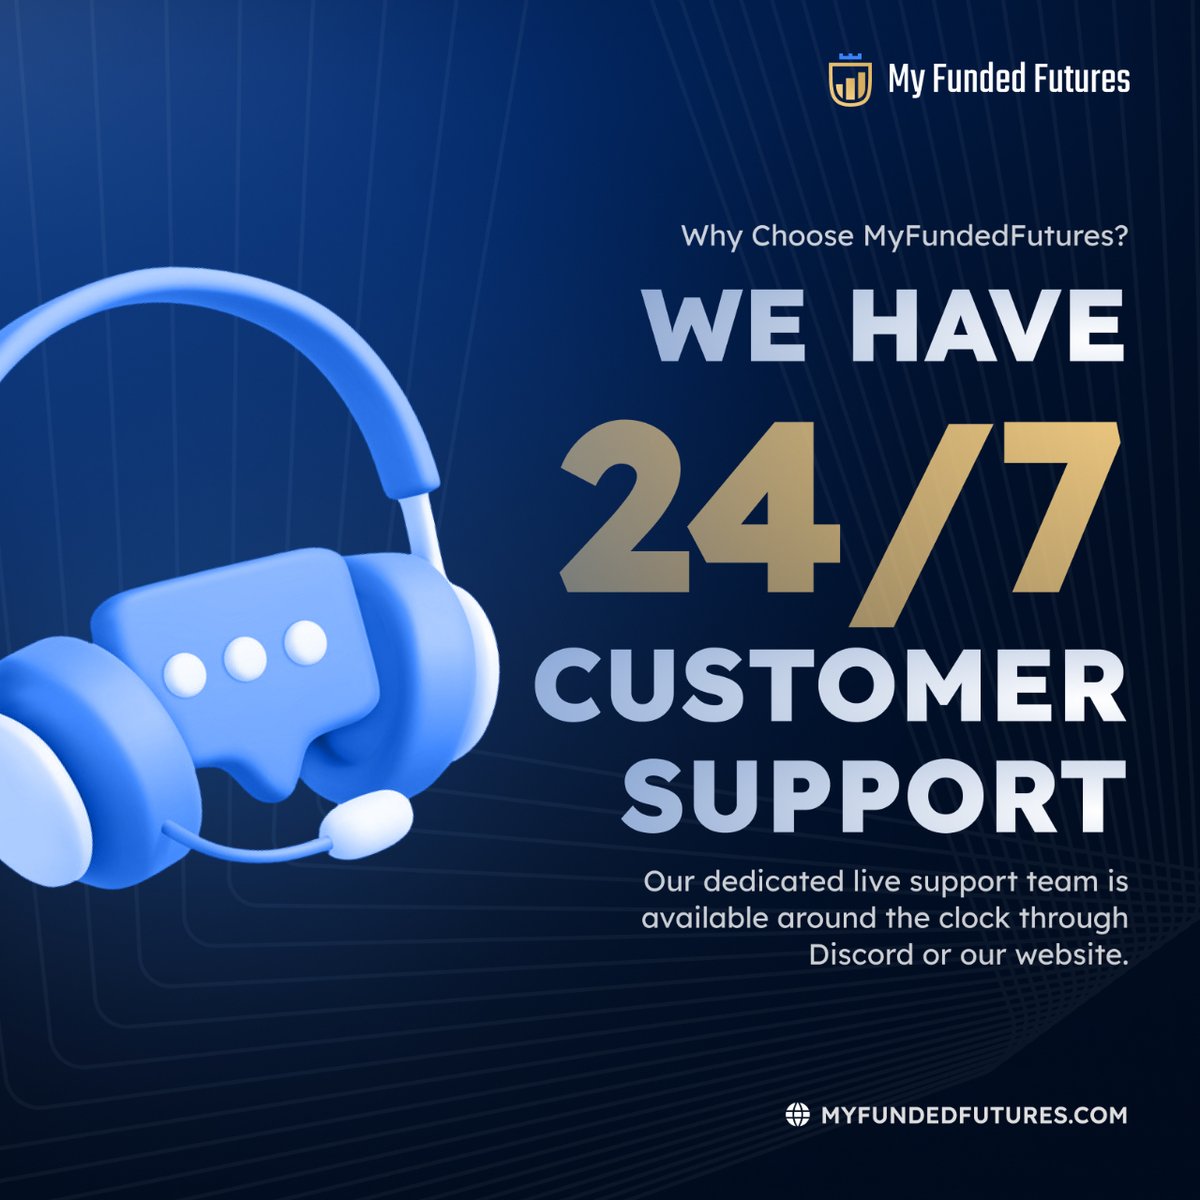 Got questions? We've got answers! Our 24/7 support team is ready to assist you anytime.